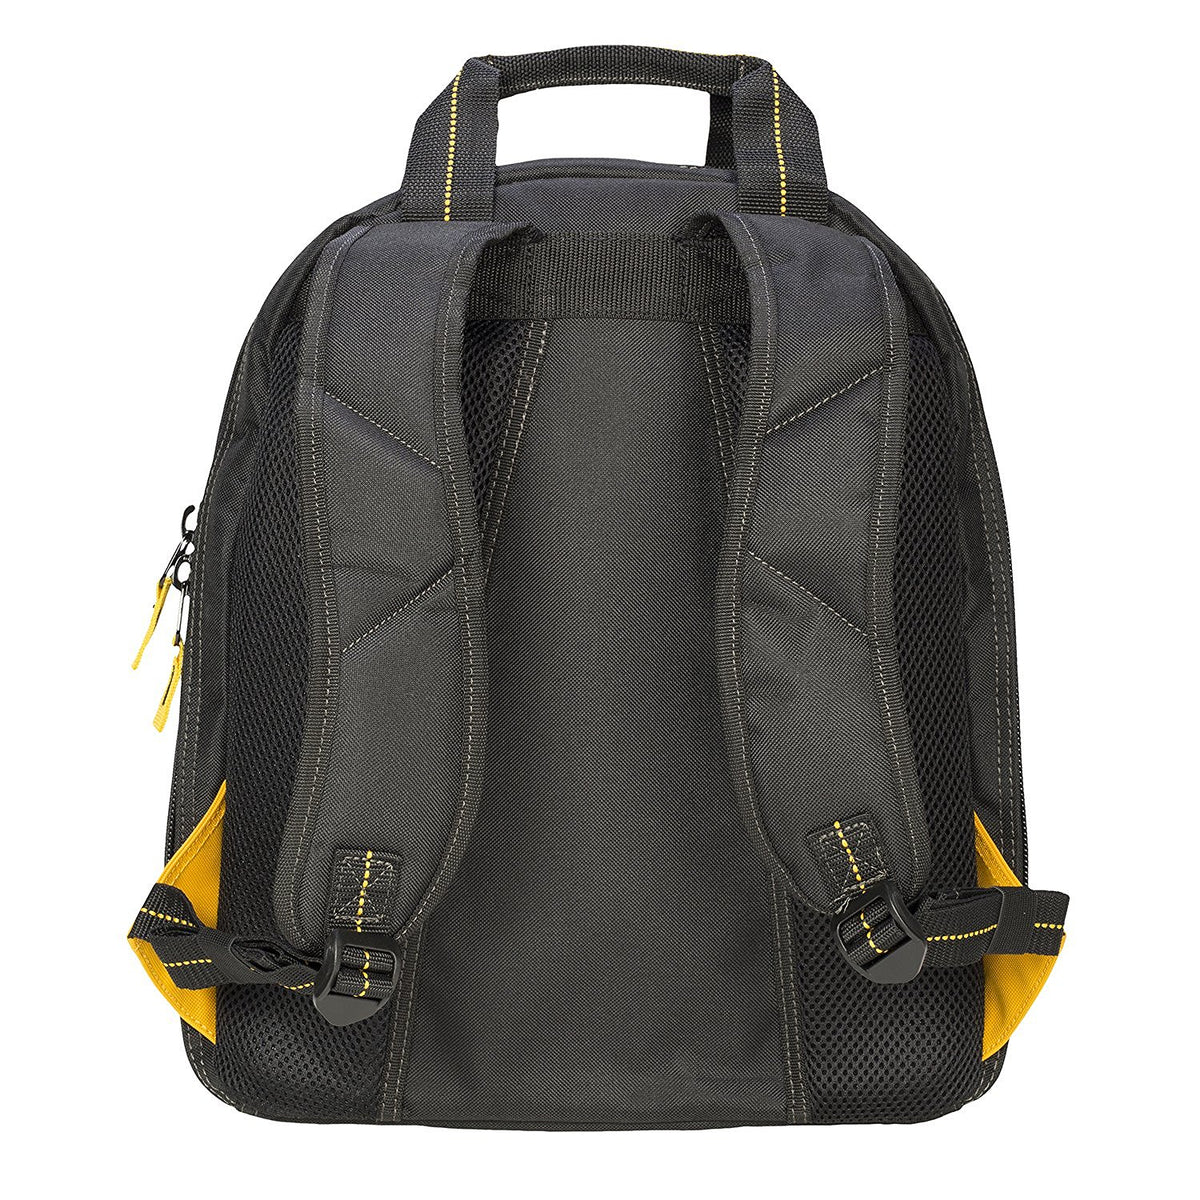 Buy dewalt dgc530 - Online store for safety & organization, tool bags in USA, on sale, low price, discount deals, coupon code